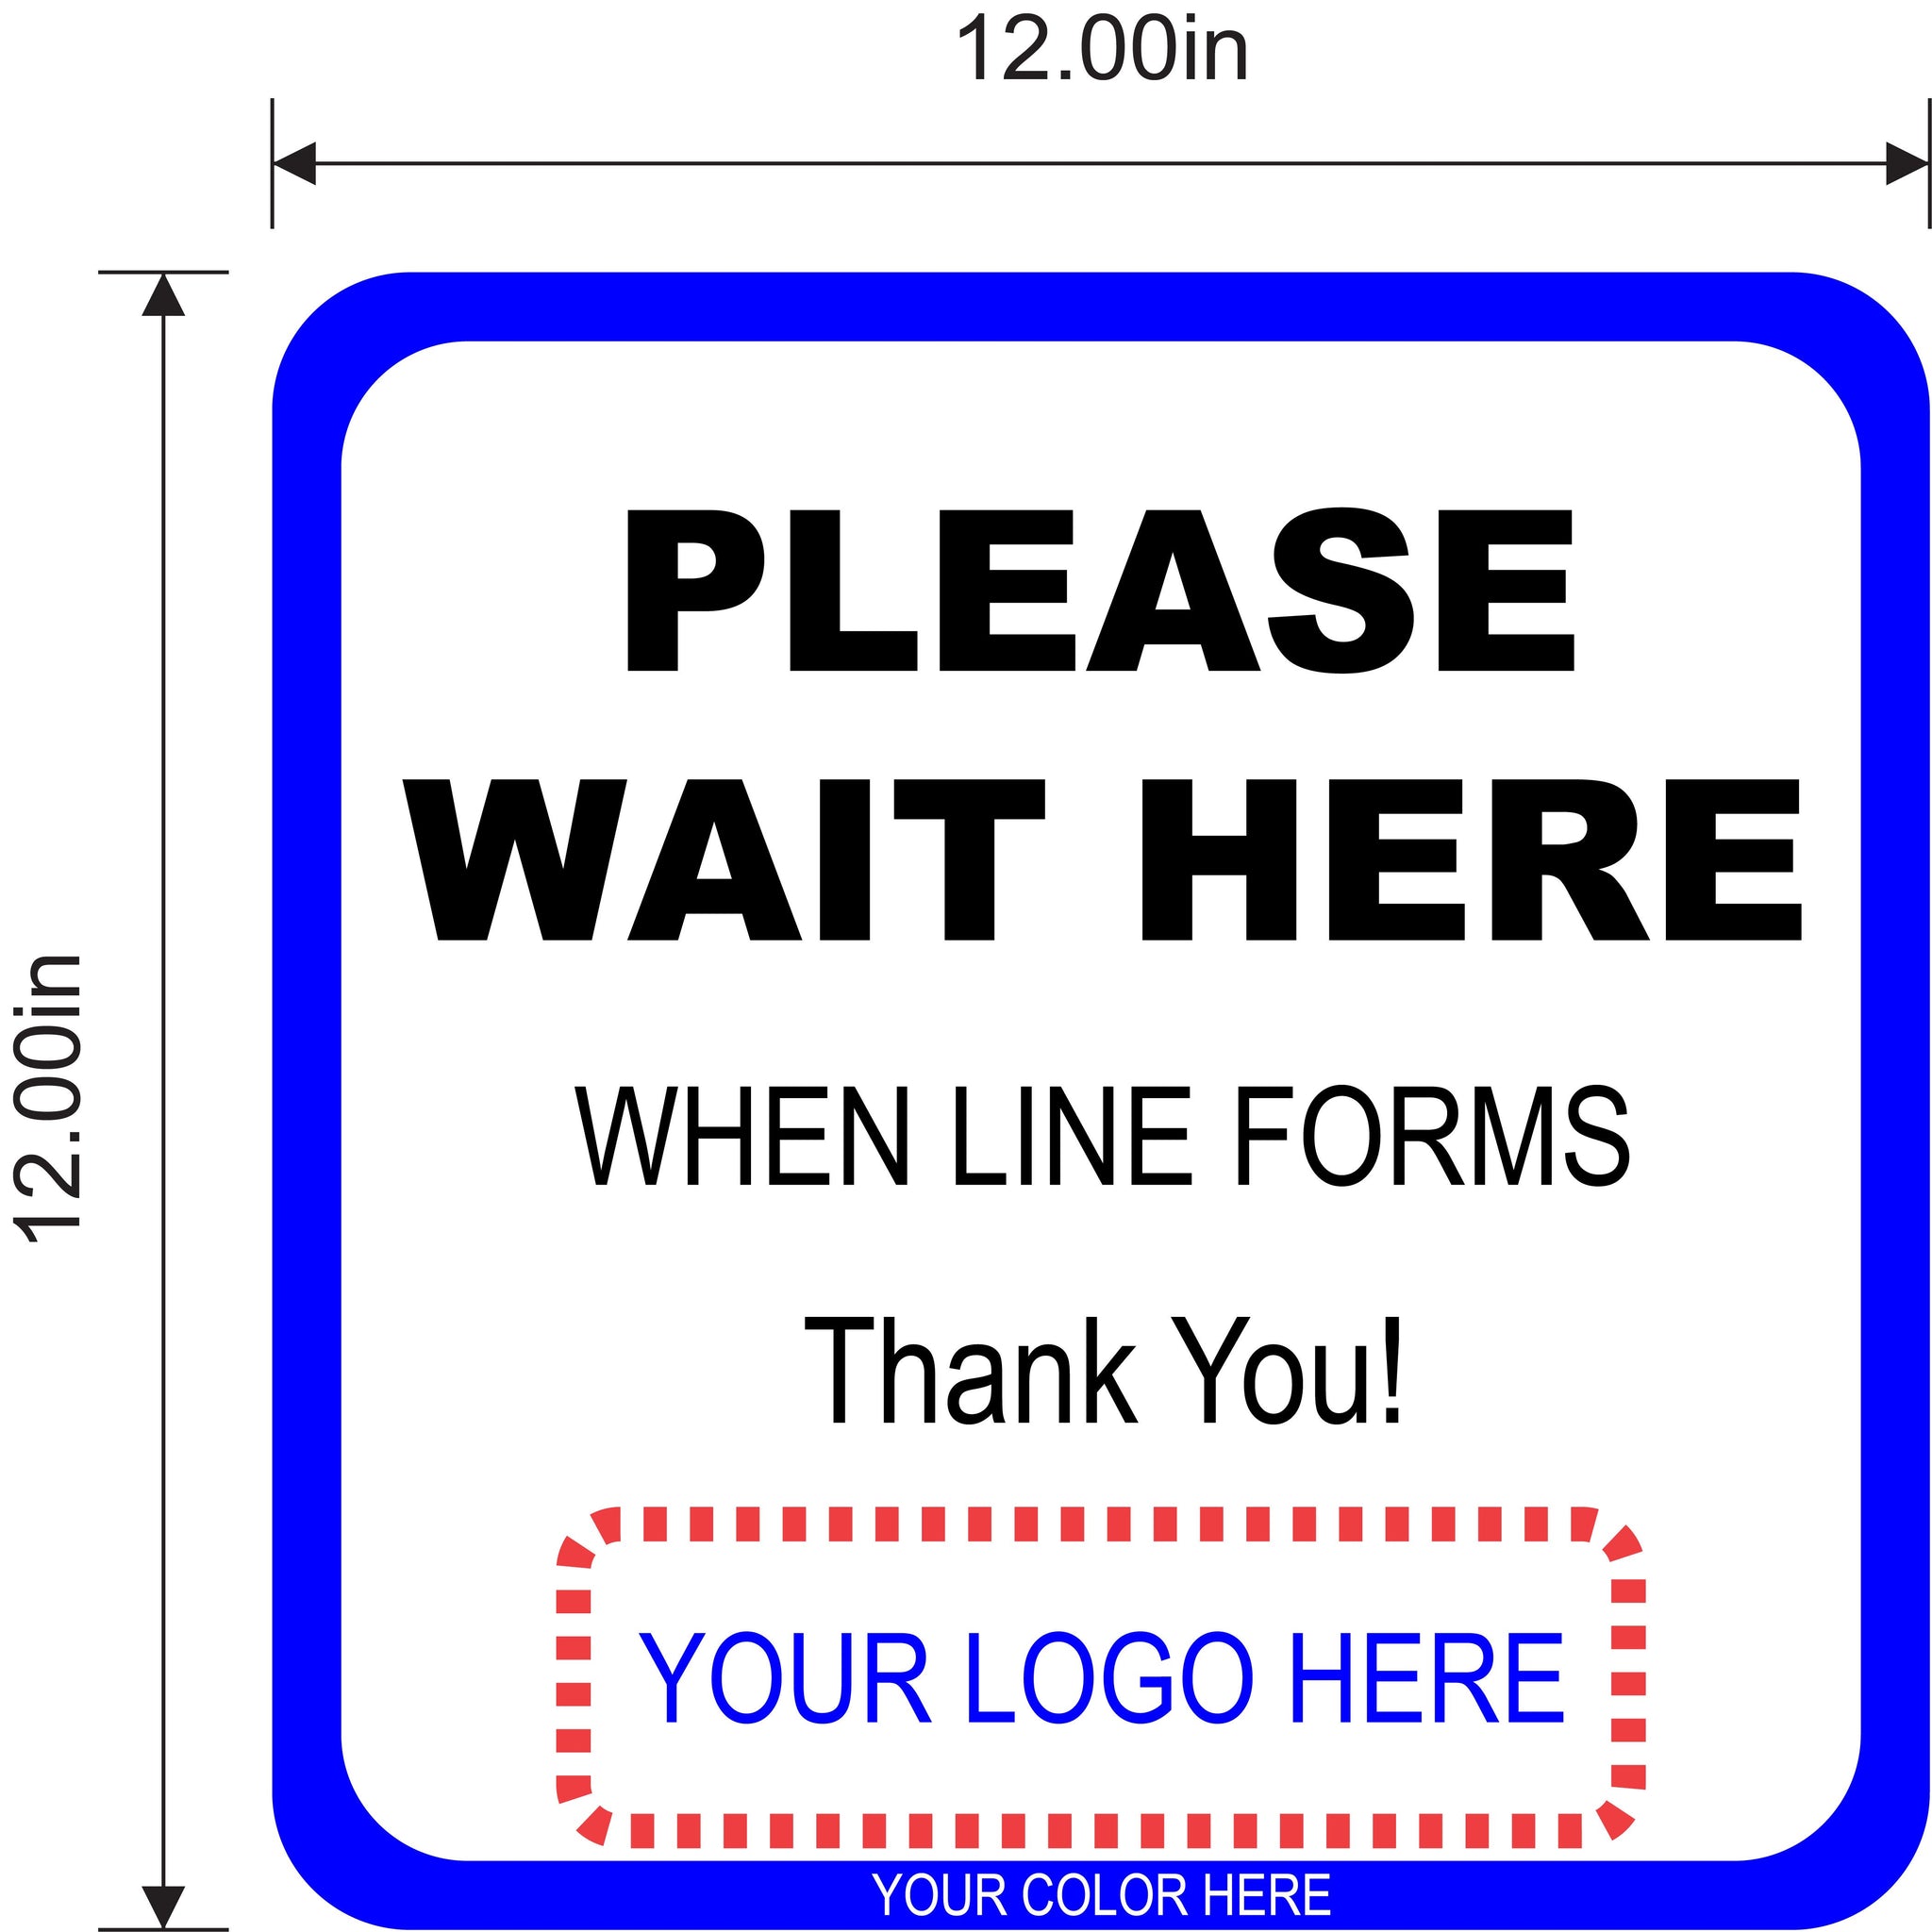 PLEASE WAIT HERE SOCIAL DISTANCING FLOOR SIGN - 12" Square with customizable logo and color scheme